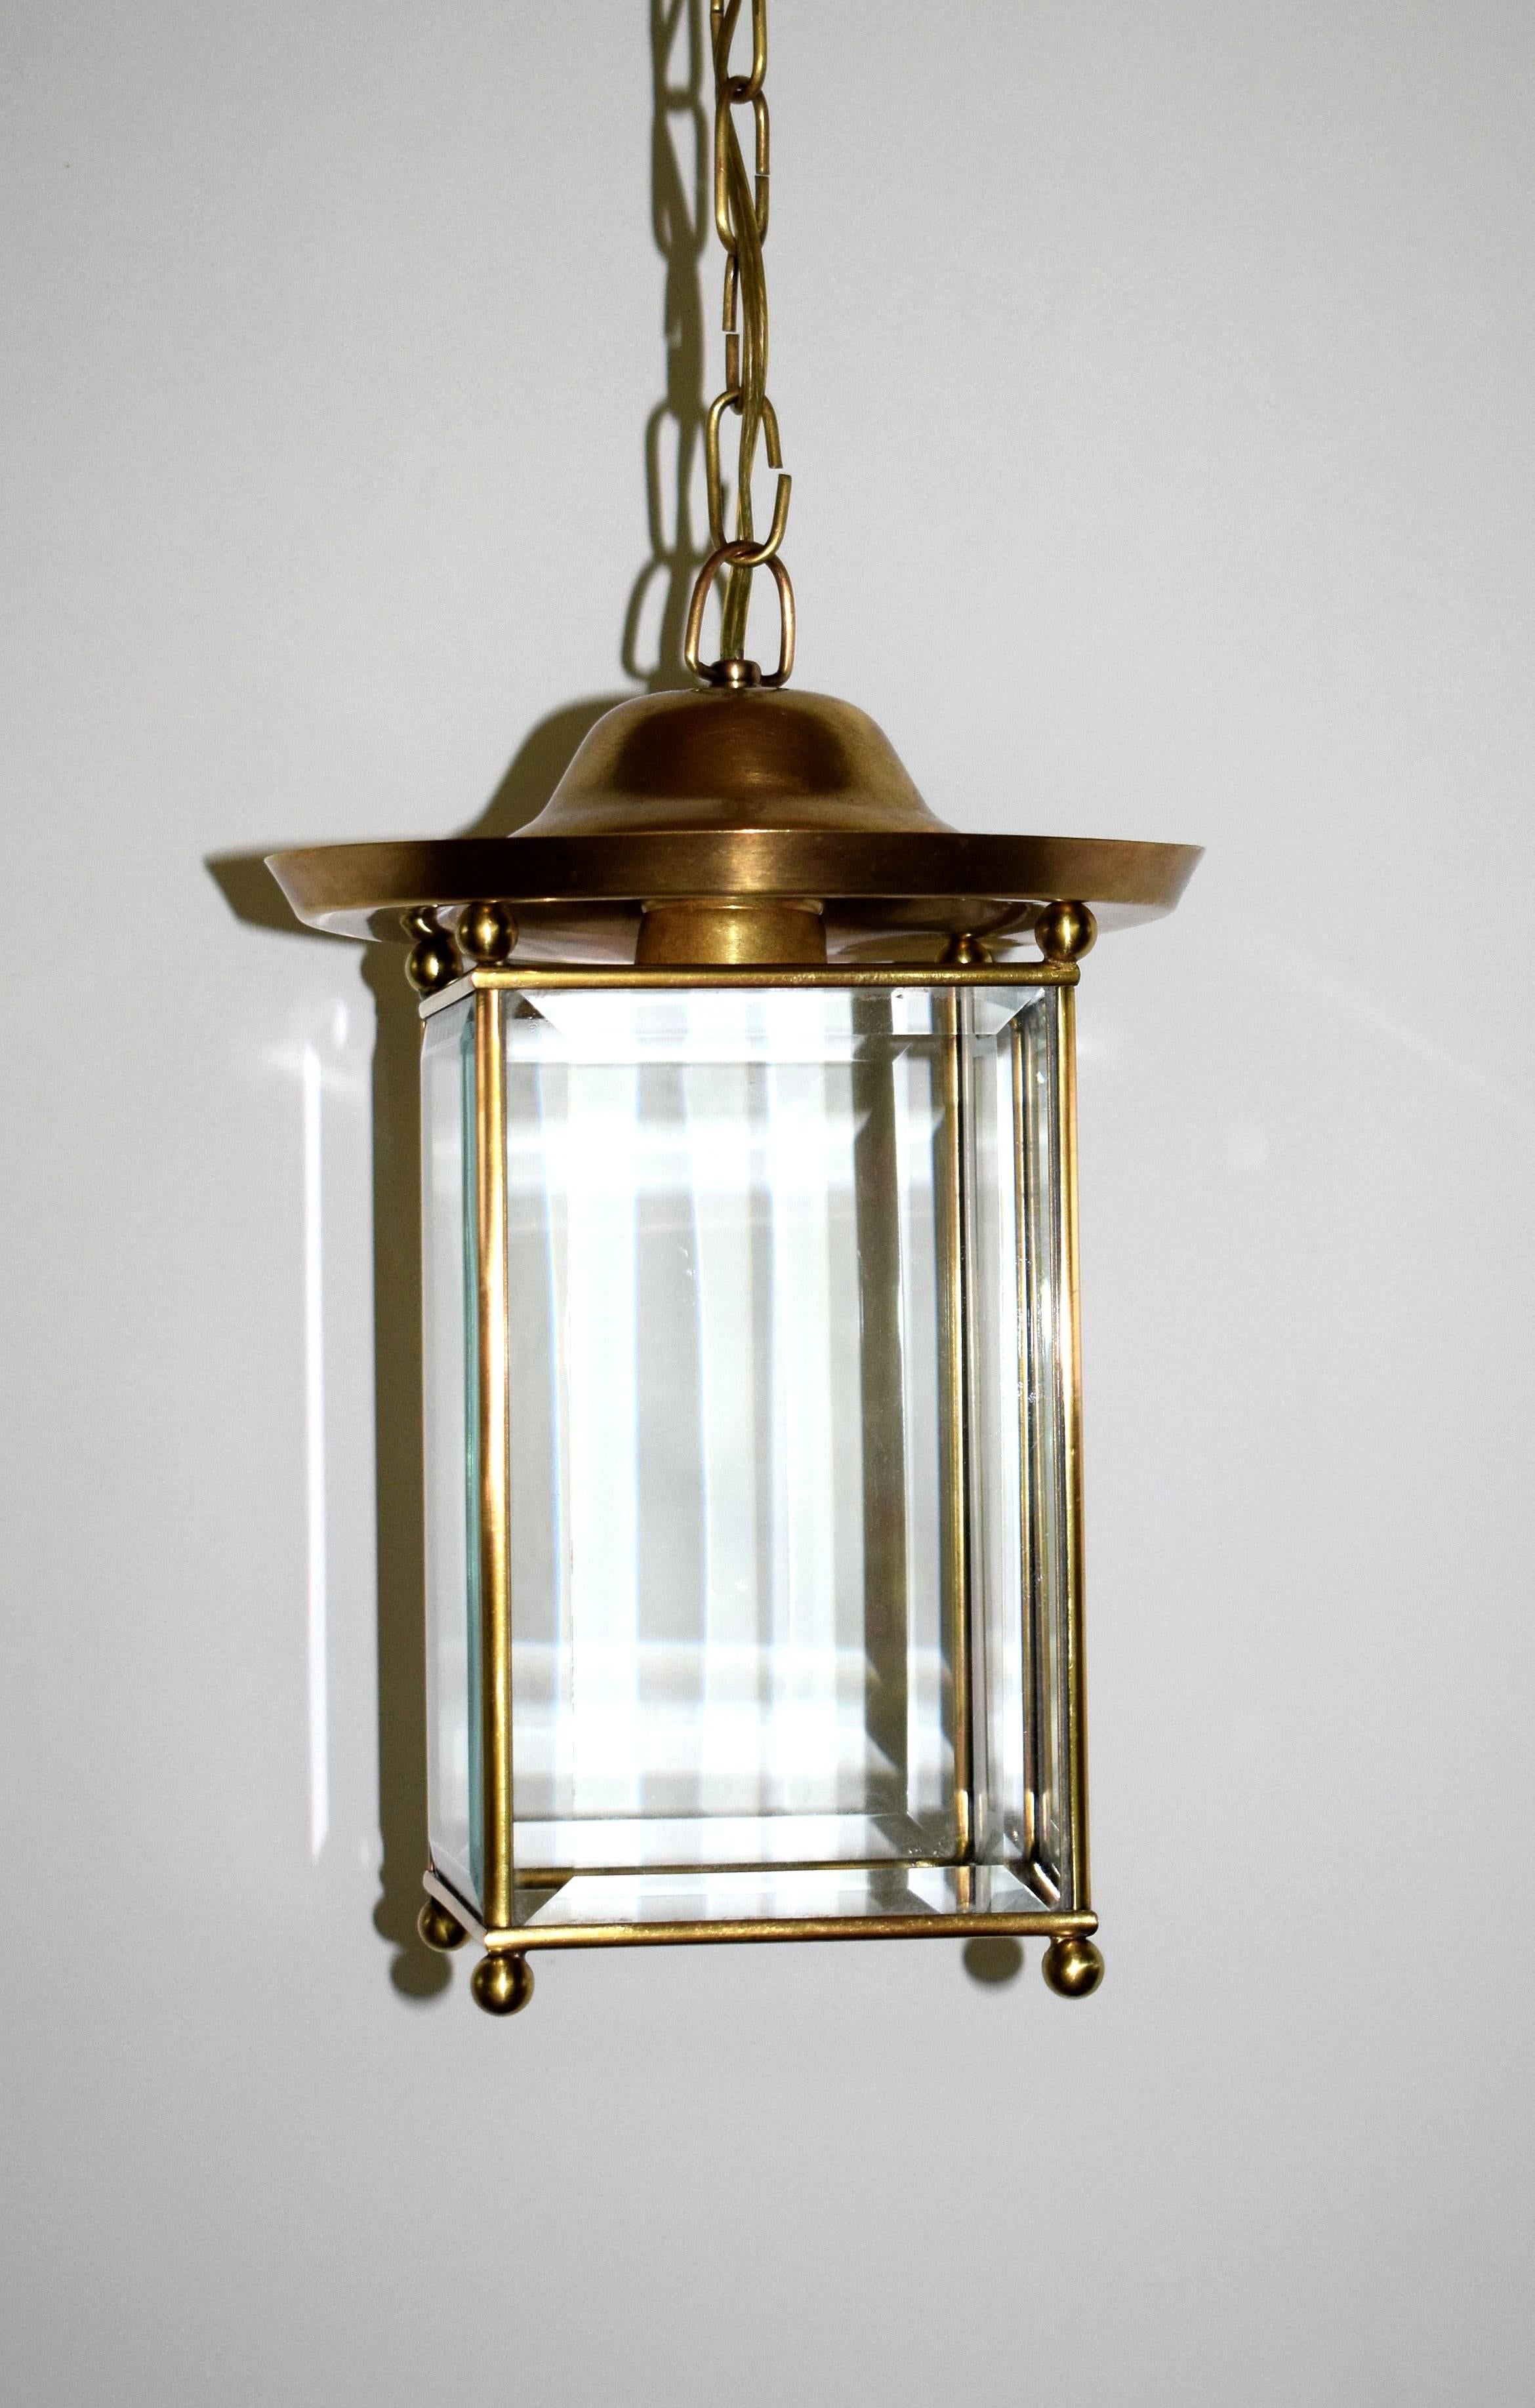 This type of puristic ceiling lamp was first designed by Josef Hoffmann in 1901.
Later he used it for several houses, Hohe Warte Henneberg House, Wärndorfer House and House Mautner Markhof.
Material: Brass and cut crystal glass, heavy and solid